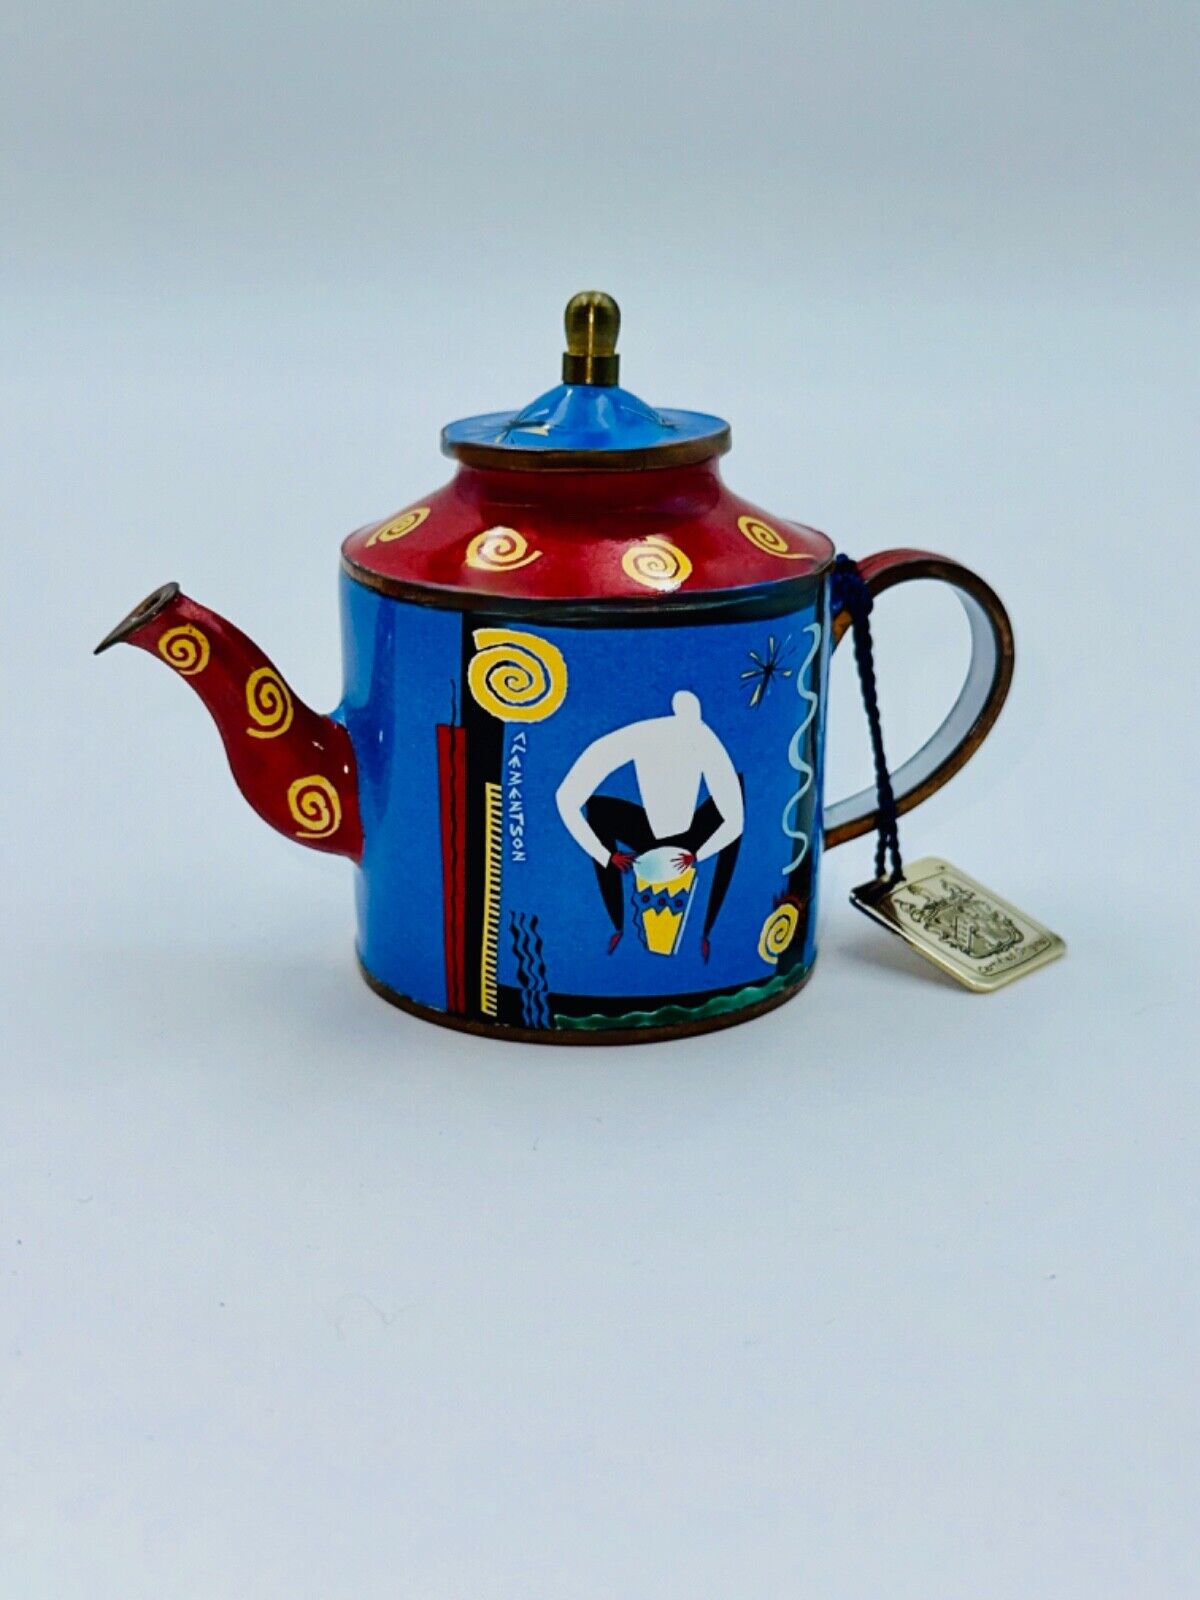 Miniature Enamel Teapot From Charlotte di Vita - The Drummer By Clementson